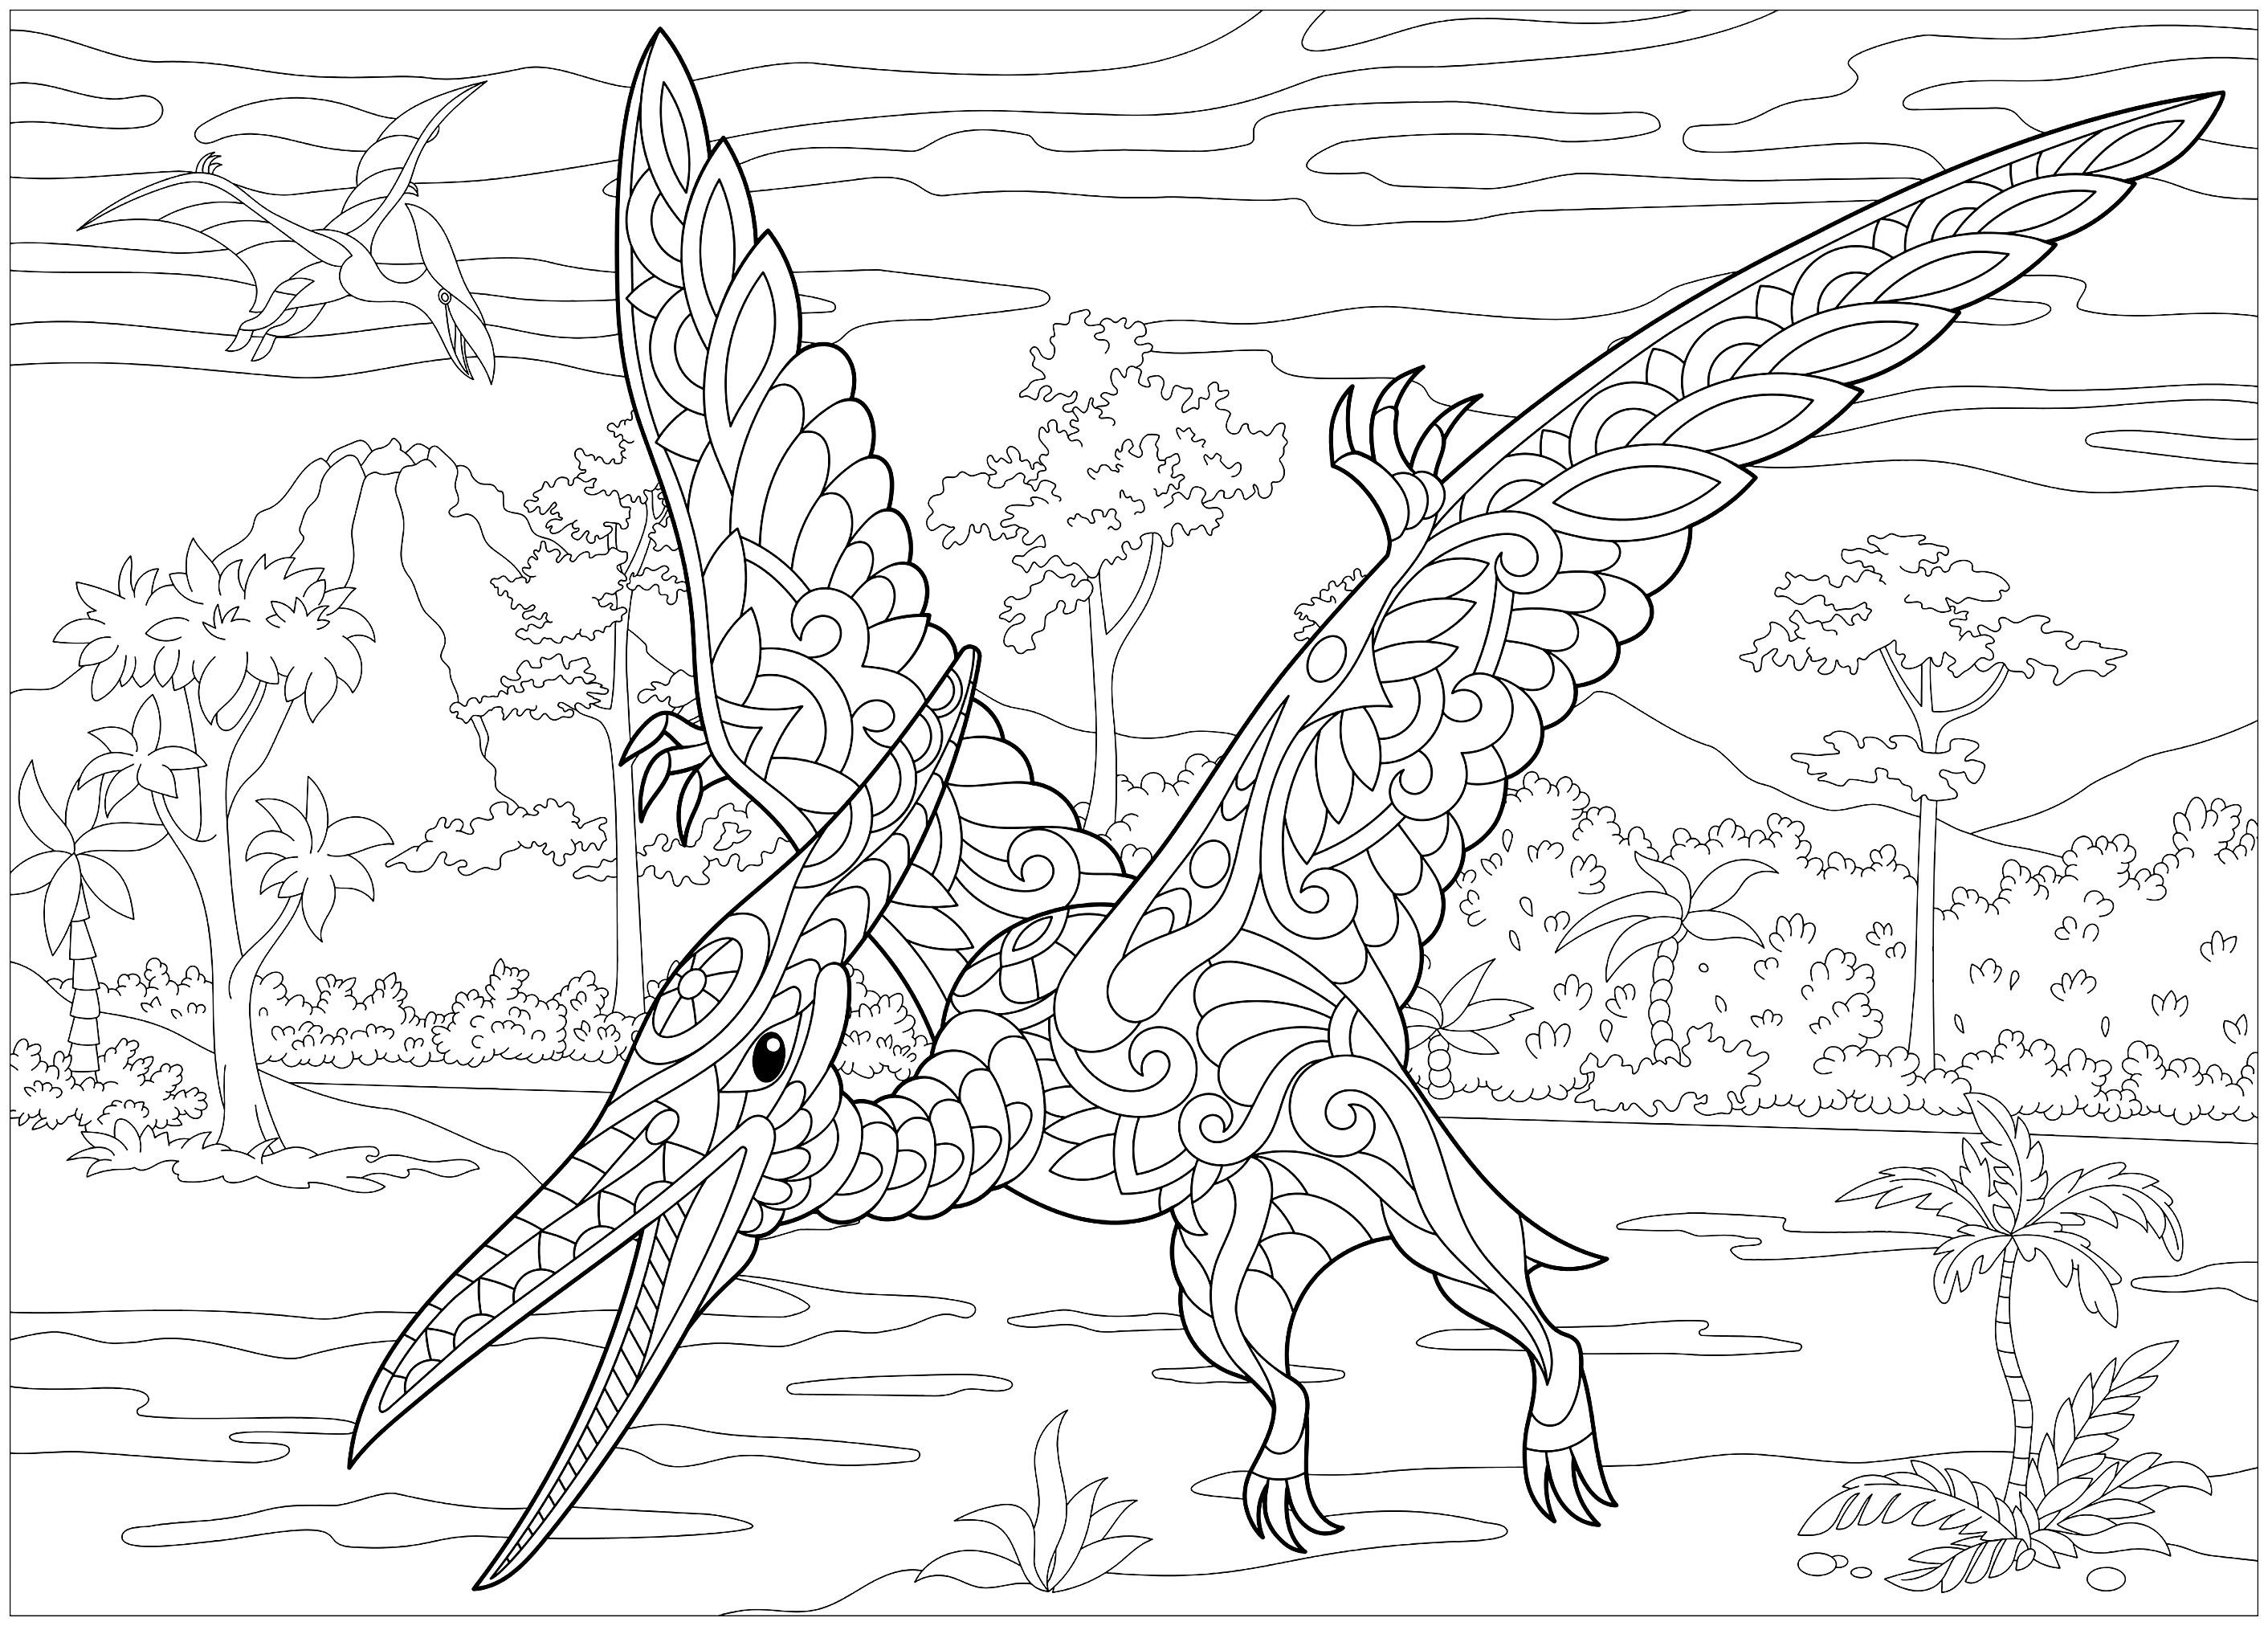 Stylized pterodactyl dinosaur with doodle and zentangle elements dinosaur coloring pages coloring book pages adult coloring book pages